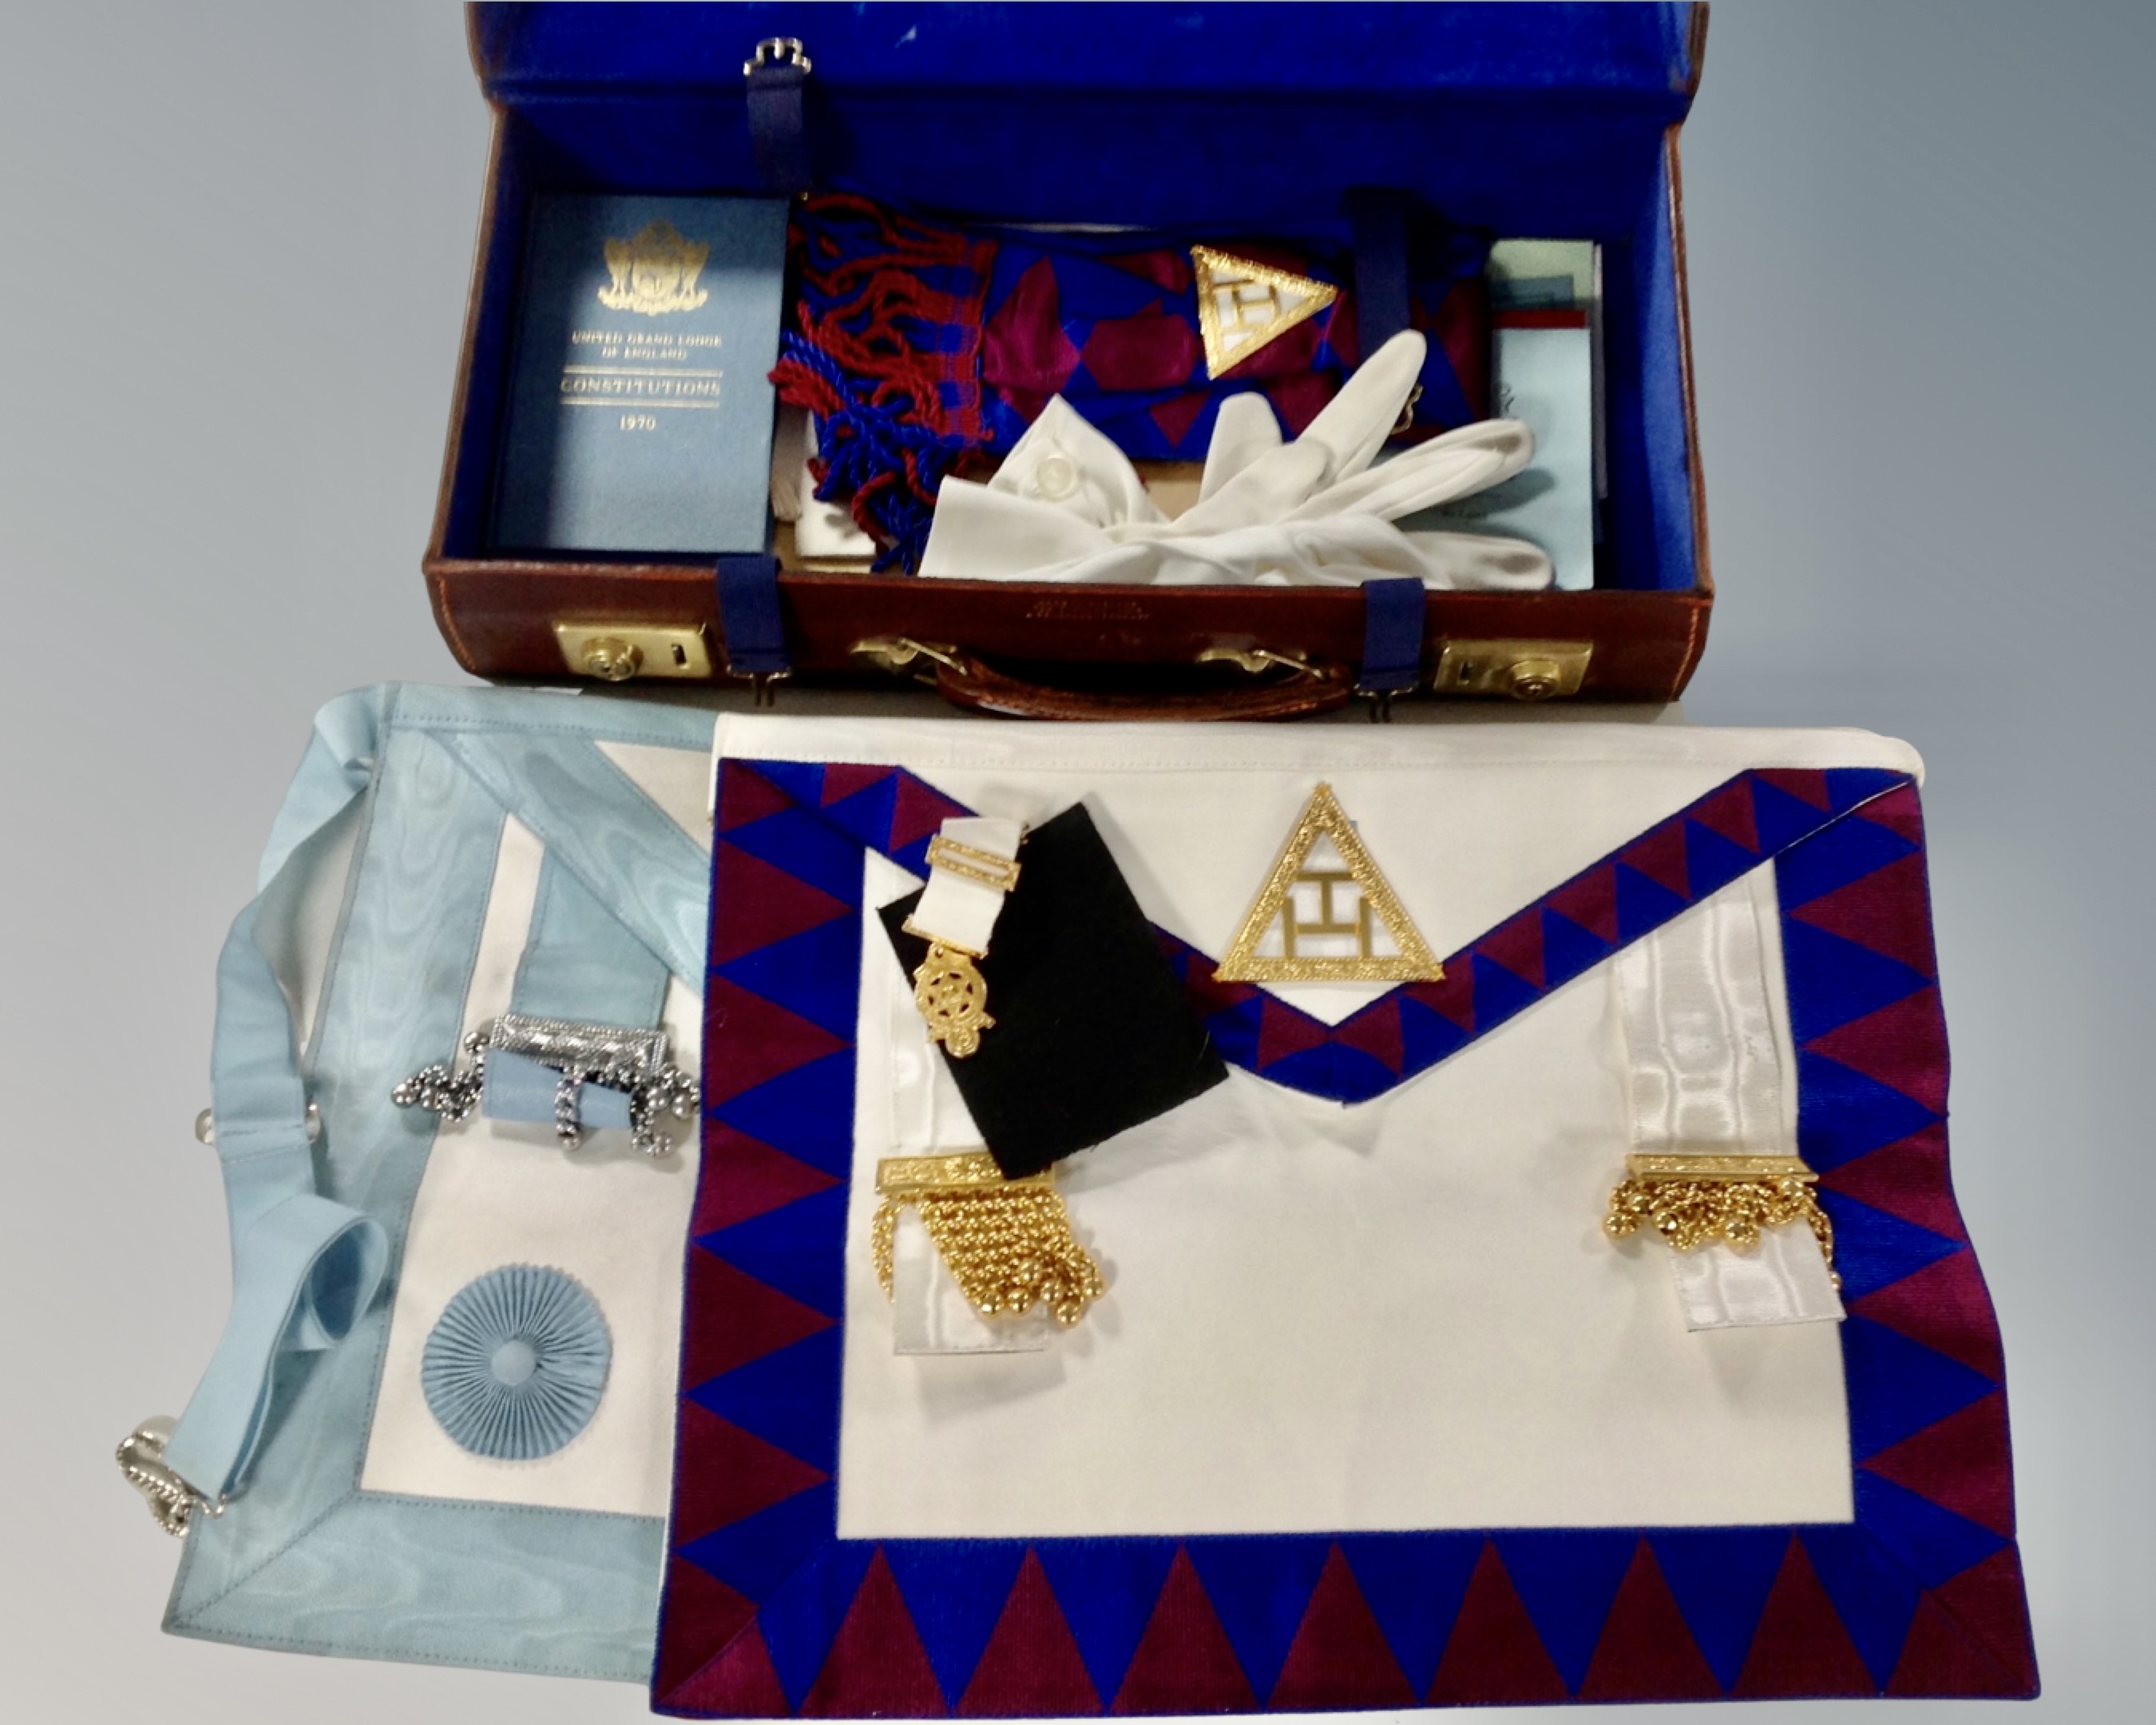 A leather case containing Freemason's ephemera, aprons and medal.